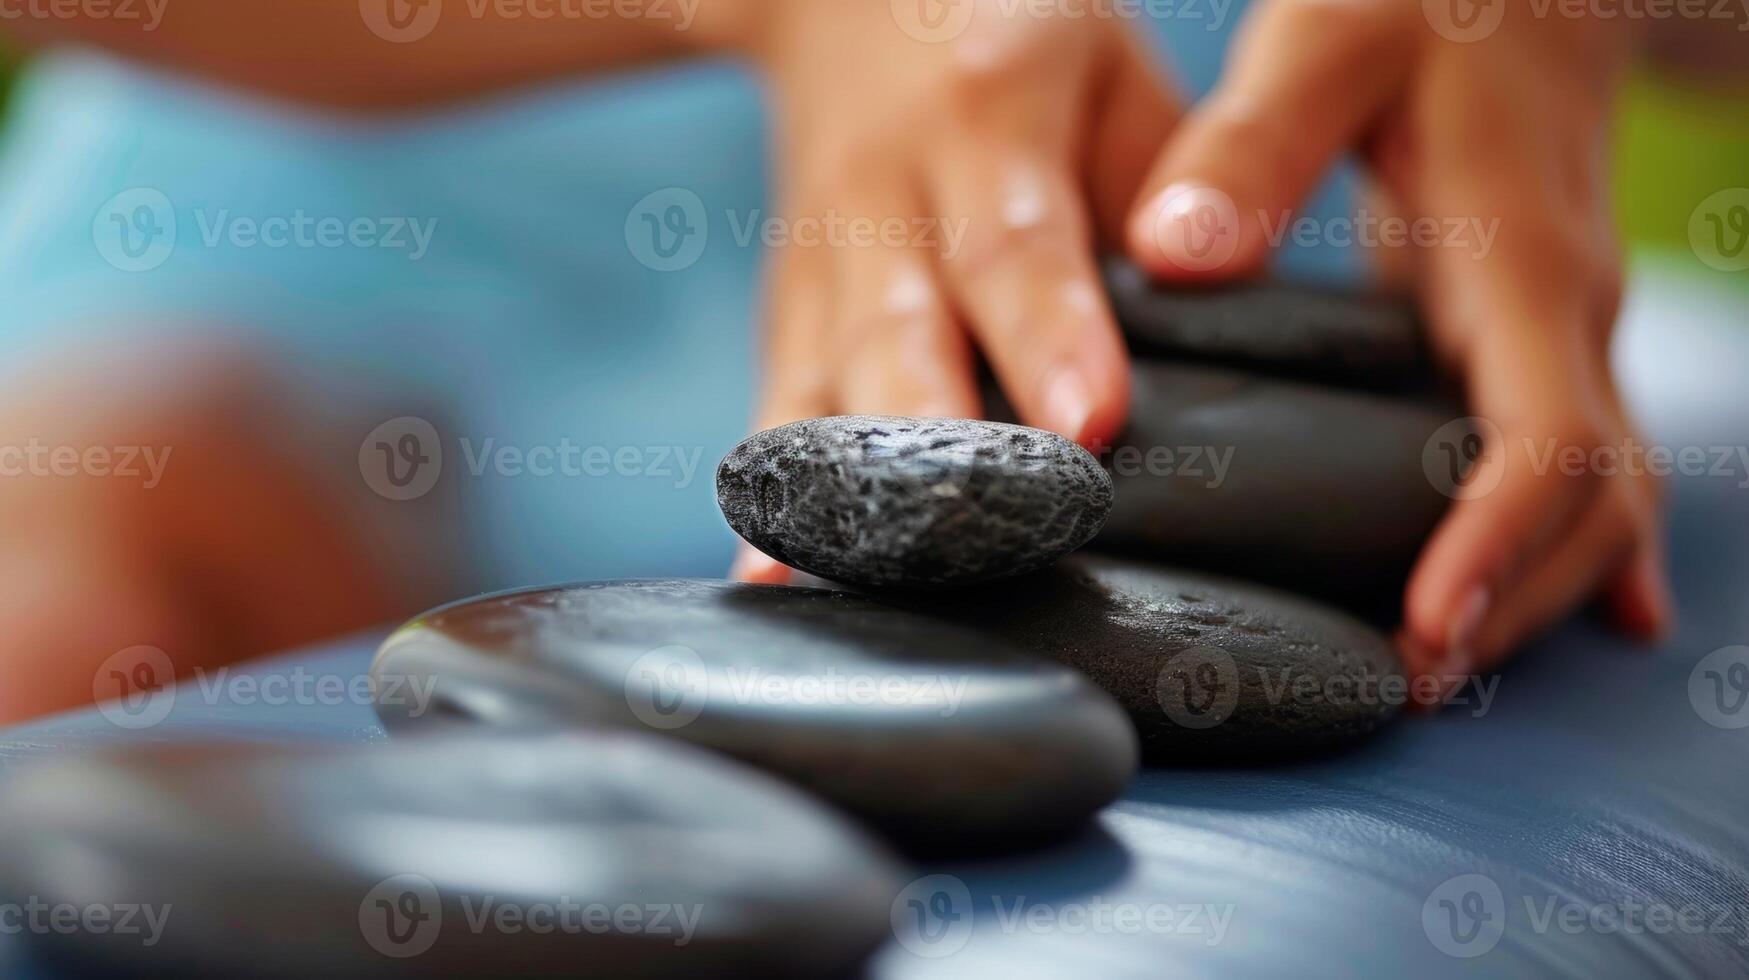 A skilled masseuse using hot stones to release tension and promote relaxation during a massage session. photo